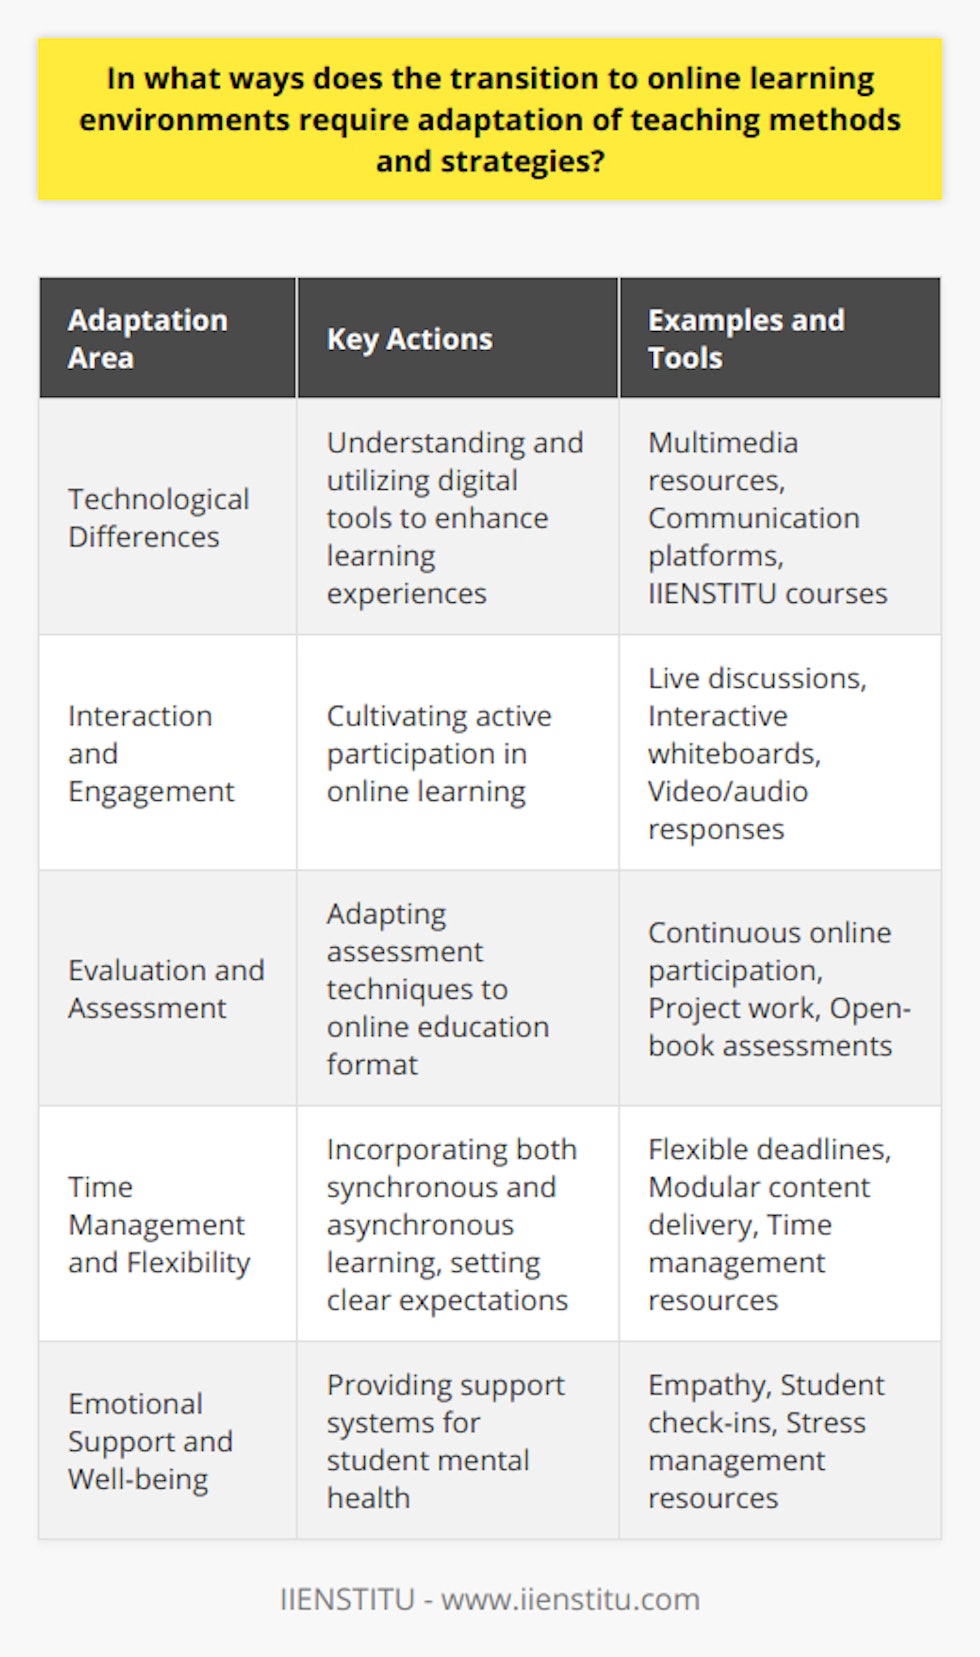 The transition to online learning environments has significantly changed the educational landscape, urging educators to adapt their teaching methods and strategies to cater to the needs of digital classrooms. This challenge requires a multi-faceted approach that addresses the technological, interactive, evaluative, logistical, and emotional dimensions of teaching.Adapting to Technological Differences involves more than just learning to navigate new software; it requires an understanding of how these digital tools can be leveraged to promote learning. For instance, teachers must engage with diverse multimedia resources to create richer, more varied learning experiences and use communication tools to maintain a constant and clear presence in their students' learning journeys. Platforms like IIENSTITU offer courses and resources that support educators in developing these skills.Promoting Interaction and Engagement in an online setting is paramount since the physical cues and in-person dynamics of a traditional classroom are absent. Teachers are finding new ways to keep students active and involved, such as hosting live discussions, using interactive tools like digital whiteboards, and encouraging the submission of video or audio responses instead of standard text-based assignments.Adjusting Evaluation and Assessment becomes necessary as the remote environment often restricts the feasibility of proctored, time-bound exams. Shifting toward continuous assessment through online participation, project work, and open-book assessments not only adheres to the integrity of online education but also reflects real-world applications of knowledge.Facilitating Time Management and Flexibility is crucial as students juggle different aspects of their lives while learning remotely. As such, educators are re-structuring content delivery to include both synchronous and asynchronous learning, with clear expectations and manageable deadlines, allowing learners to manage their time effectively without sacrificing the quality of their education.Lastly, Prioritizing Emotional Support and Well-being has become an integral part of educational adaptation. The isolation of remote learning can heavily impact students' mental health. Educators can combat this by demonstrating empathy, initiating check-ins, and providing resources to help students navigate the stressors associated with online learning. As education continues to evolve within the digital realm, the key for educators lies in balancing the rich heritage of traditional pedagogic techniques with innovative online strategies to ensure a comprehensive and inclusive approach to student learning and engagement.